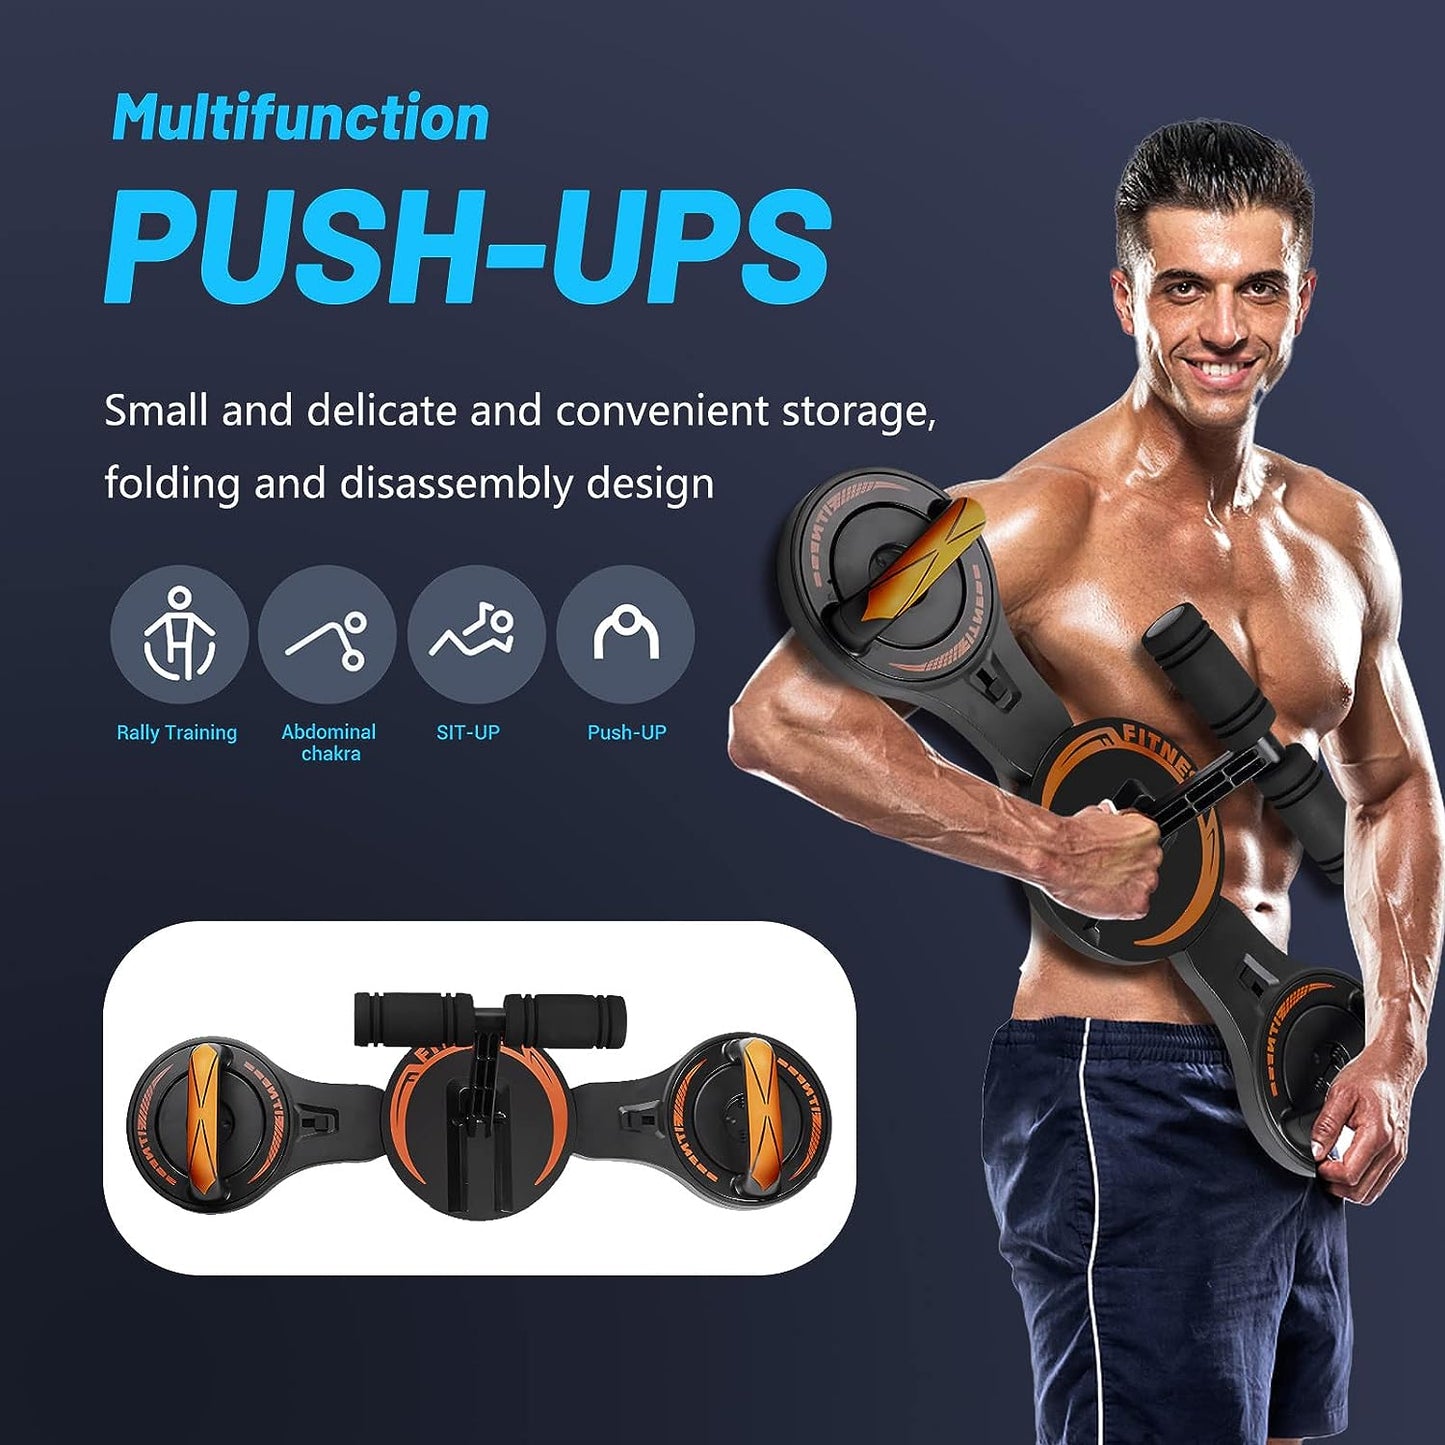 Push Up Board， Multi-Functional 2 in 1 Push Up Bar with Resistance Bands, Portable Home Gym, Strength Training Equipment for Perfect Pushups, Home Fitness for Men and Women (UP Black)